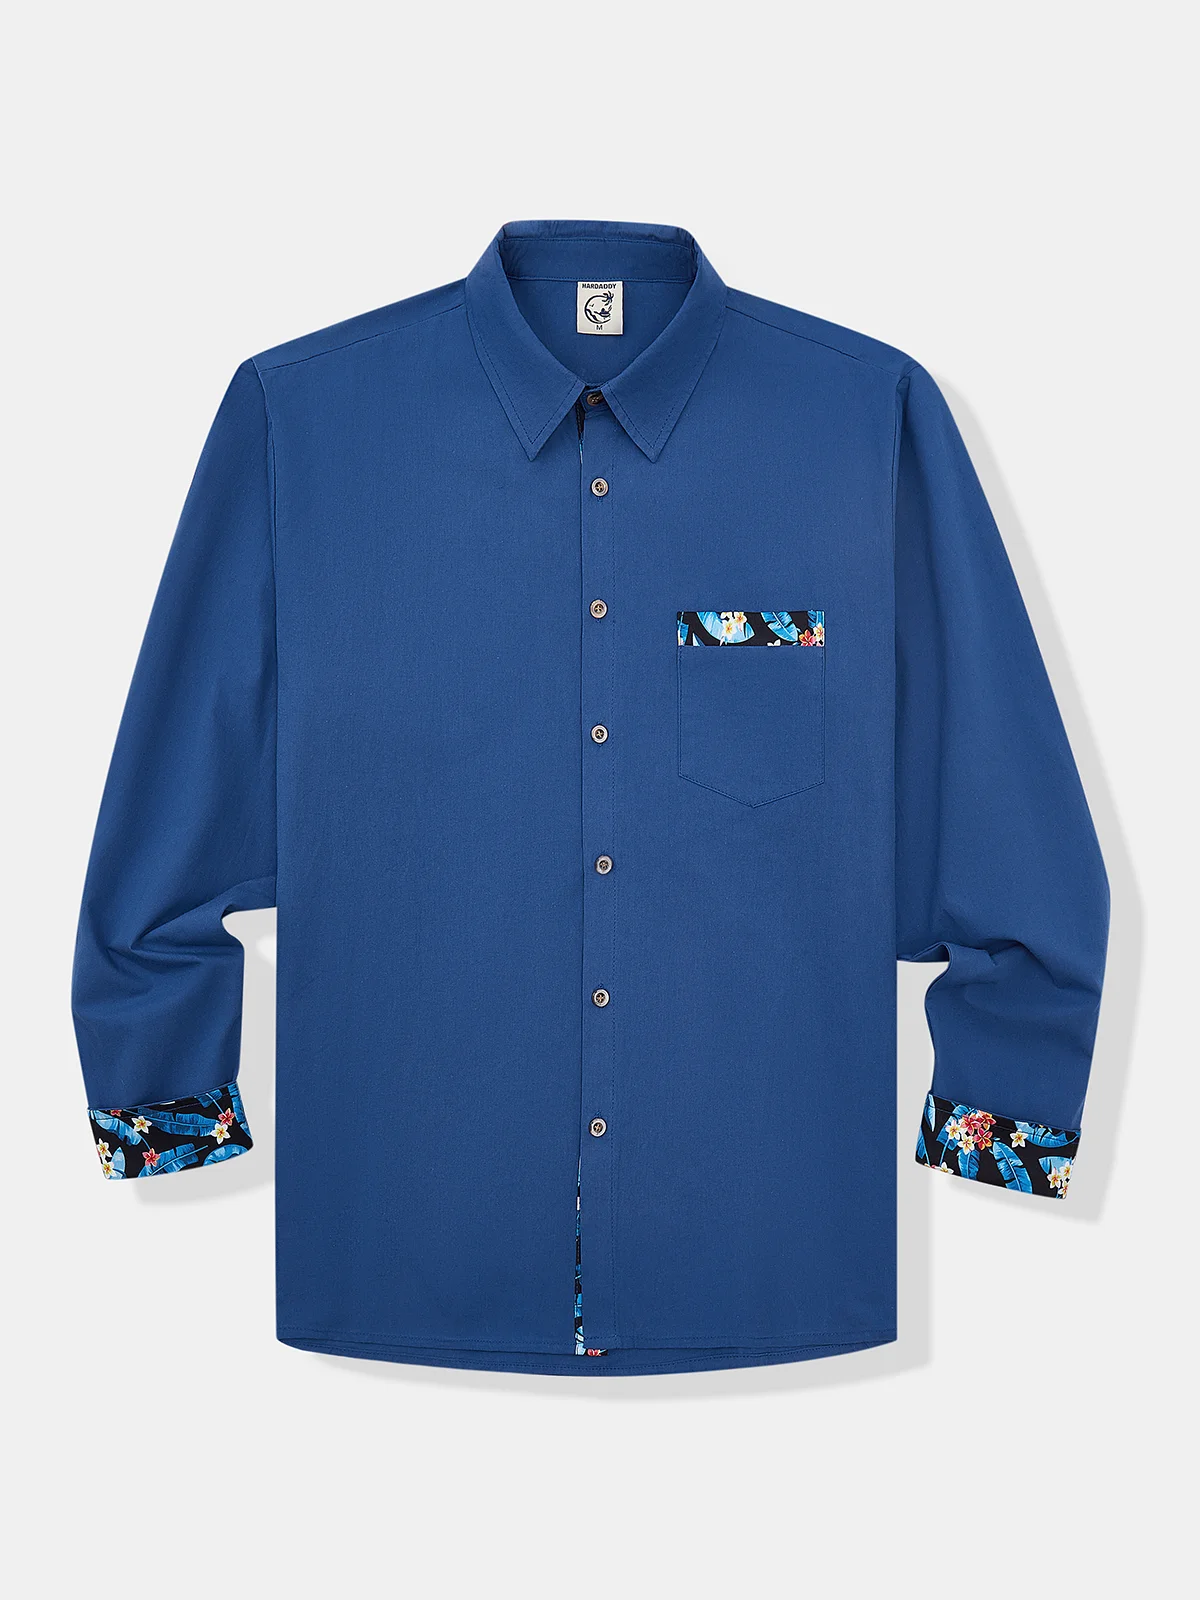 Hardaddy Cotton Contrast Floral Long Sleeve Casual Shirt